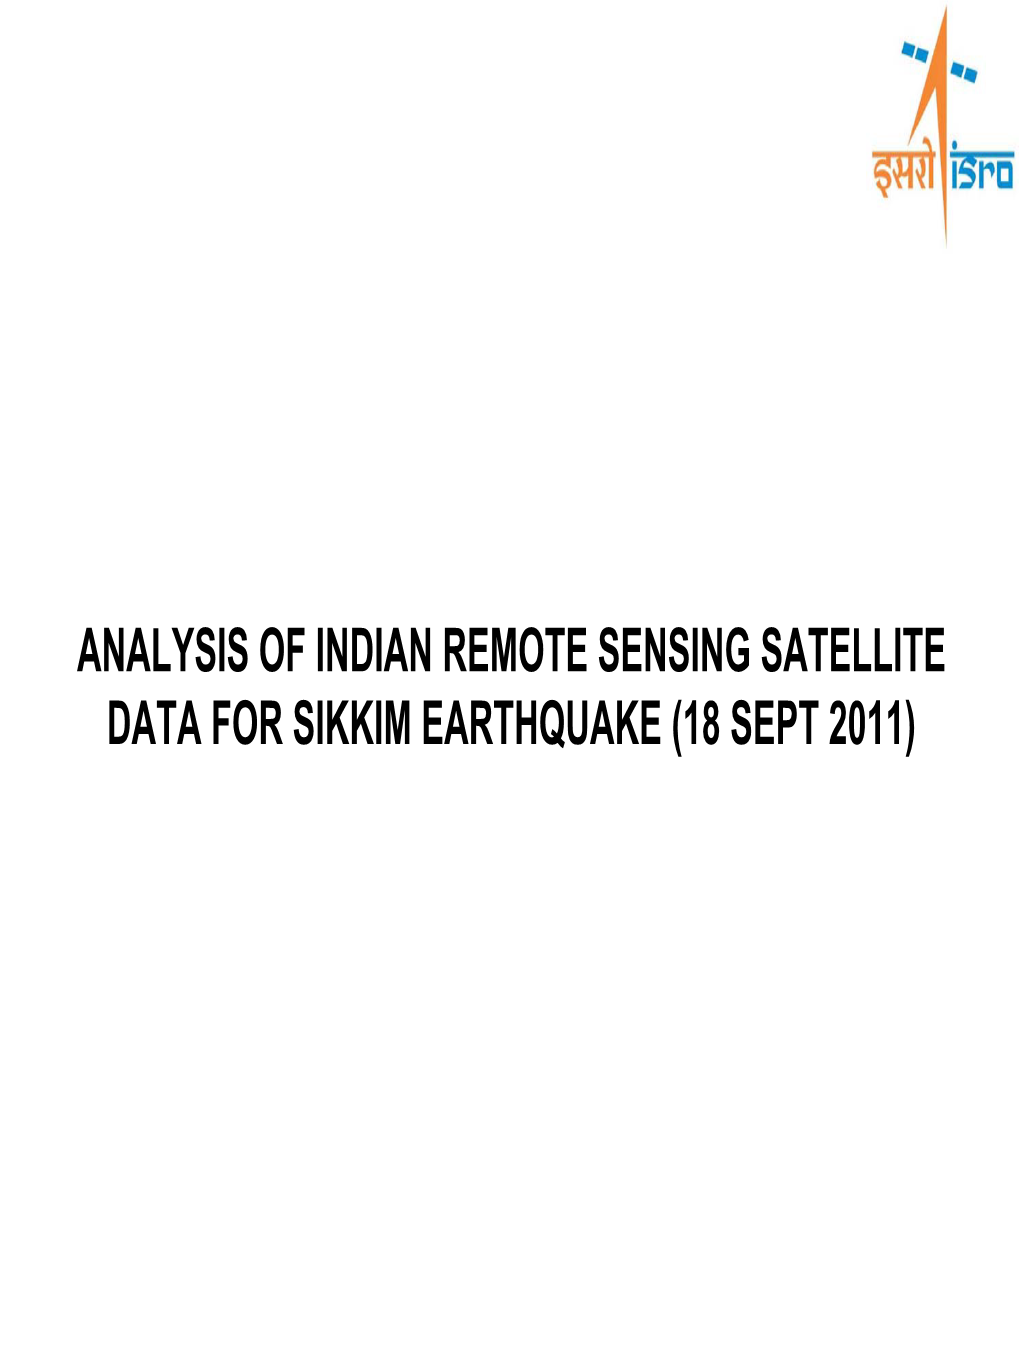 ANALYSIS of INDIAN REMOTE SENSING SATELLITE DATA for SIKKIM EARTHQUAKE (18 SEPT 2011) Earthquake Details (Source: USGS)